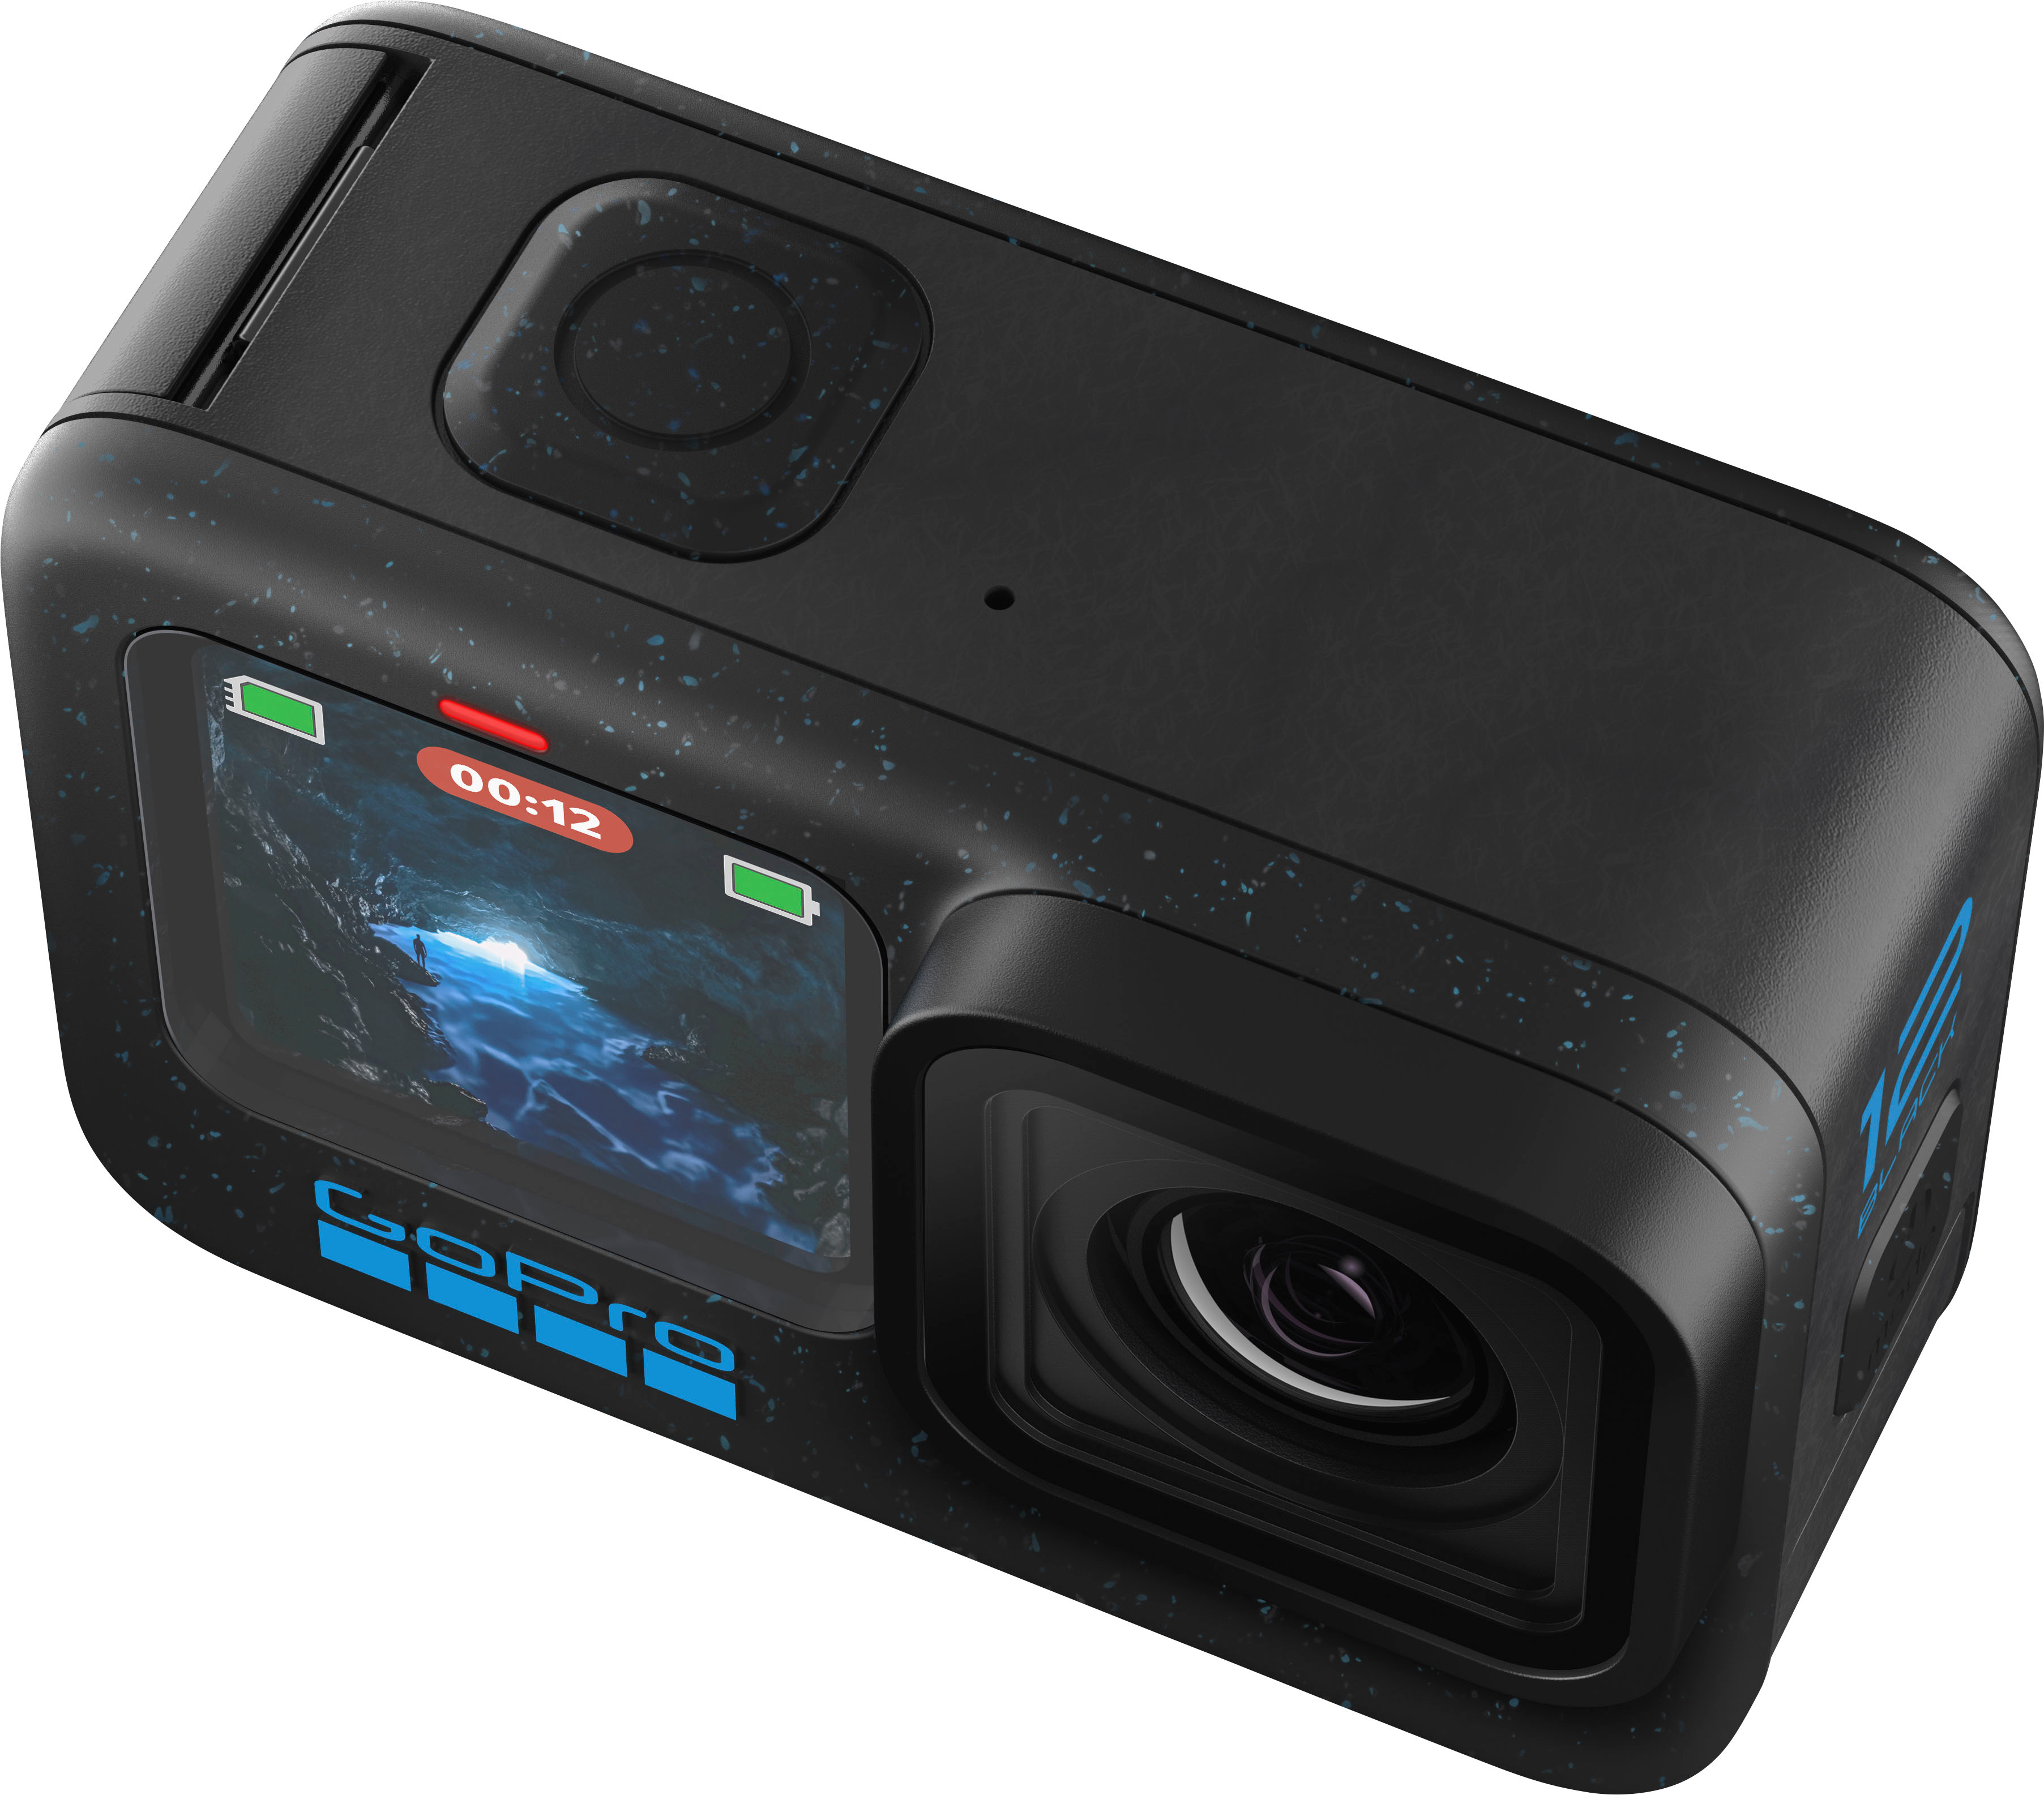 GoPro Hero12 Black Review: This tiny action camera provides a